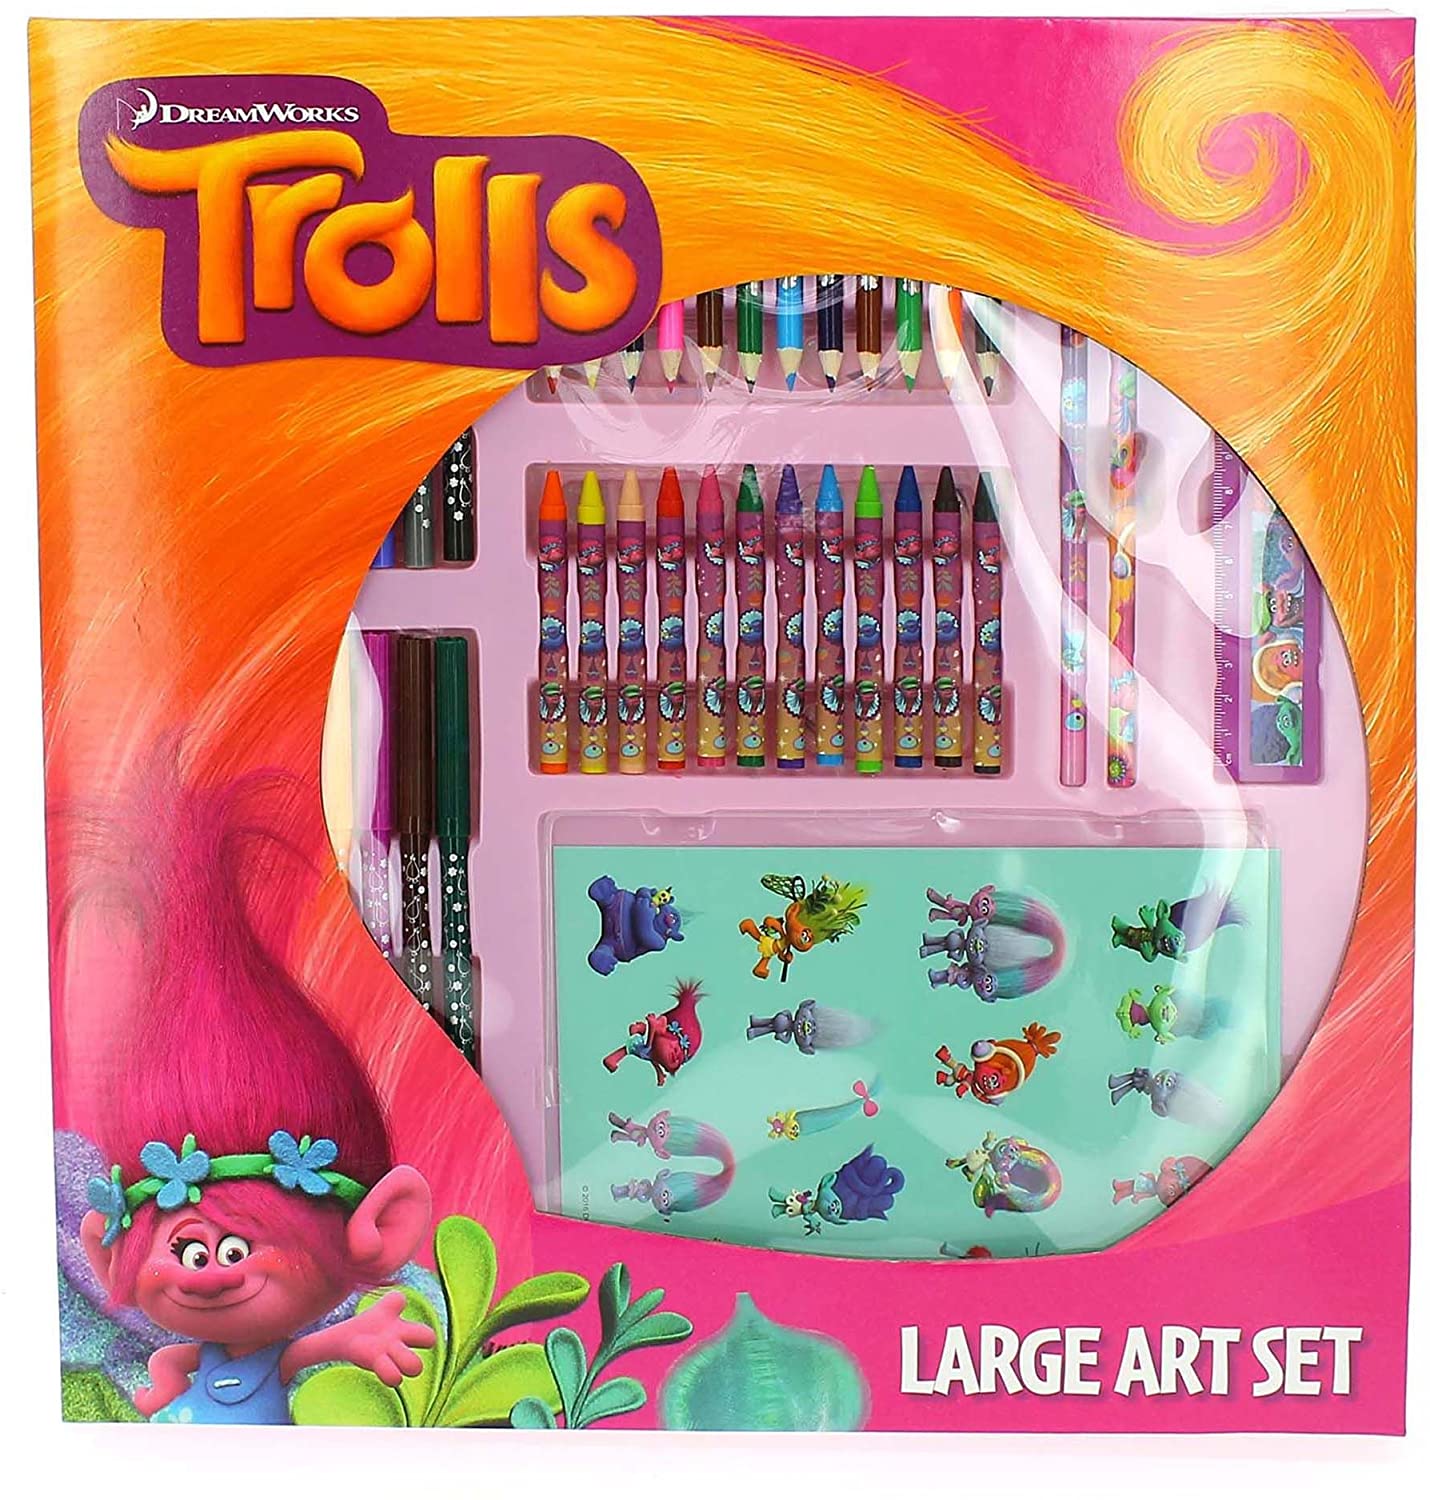 Trolls Movie Large Art Set - Stockpoint Apparel Outlet